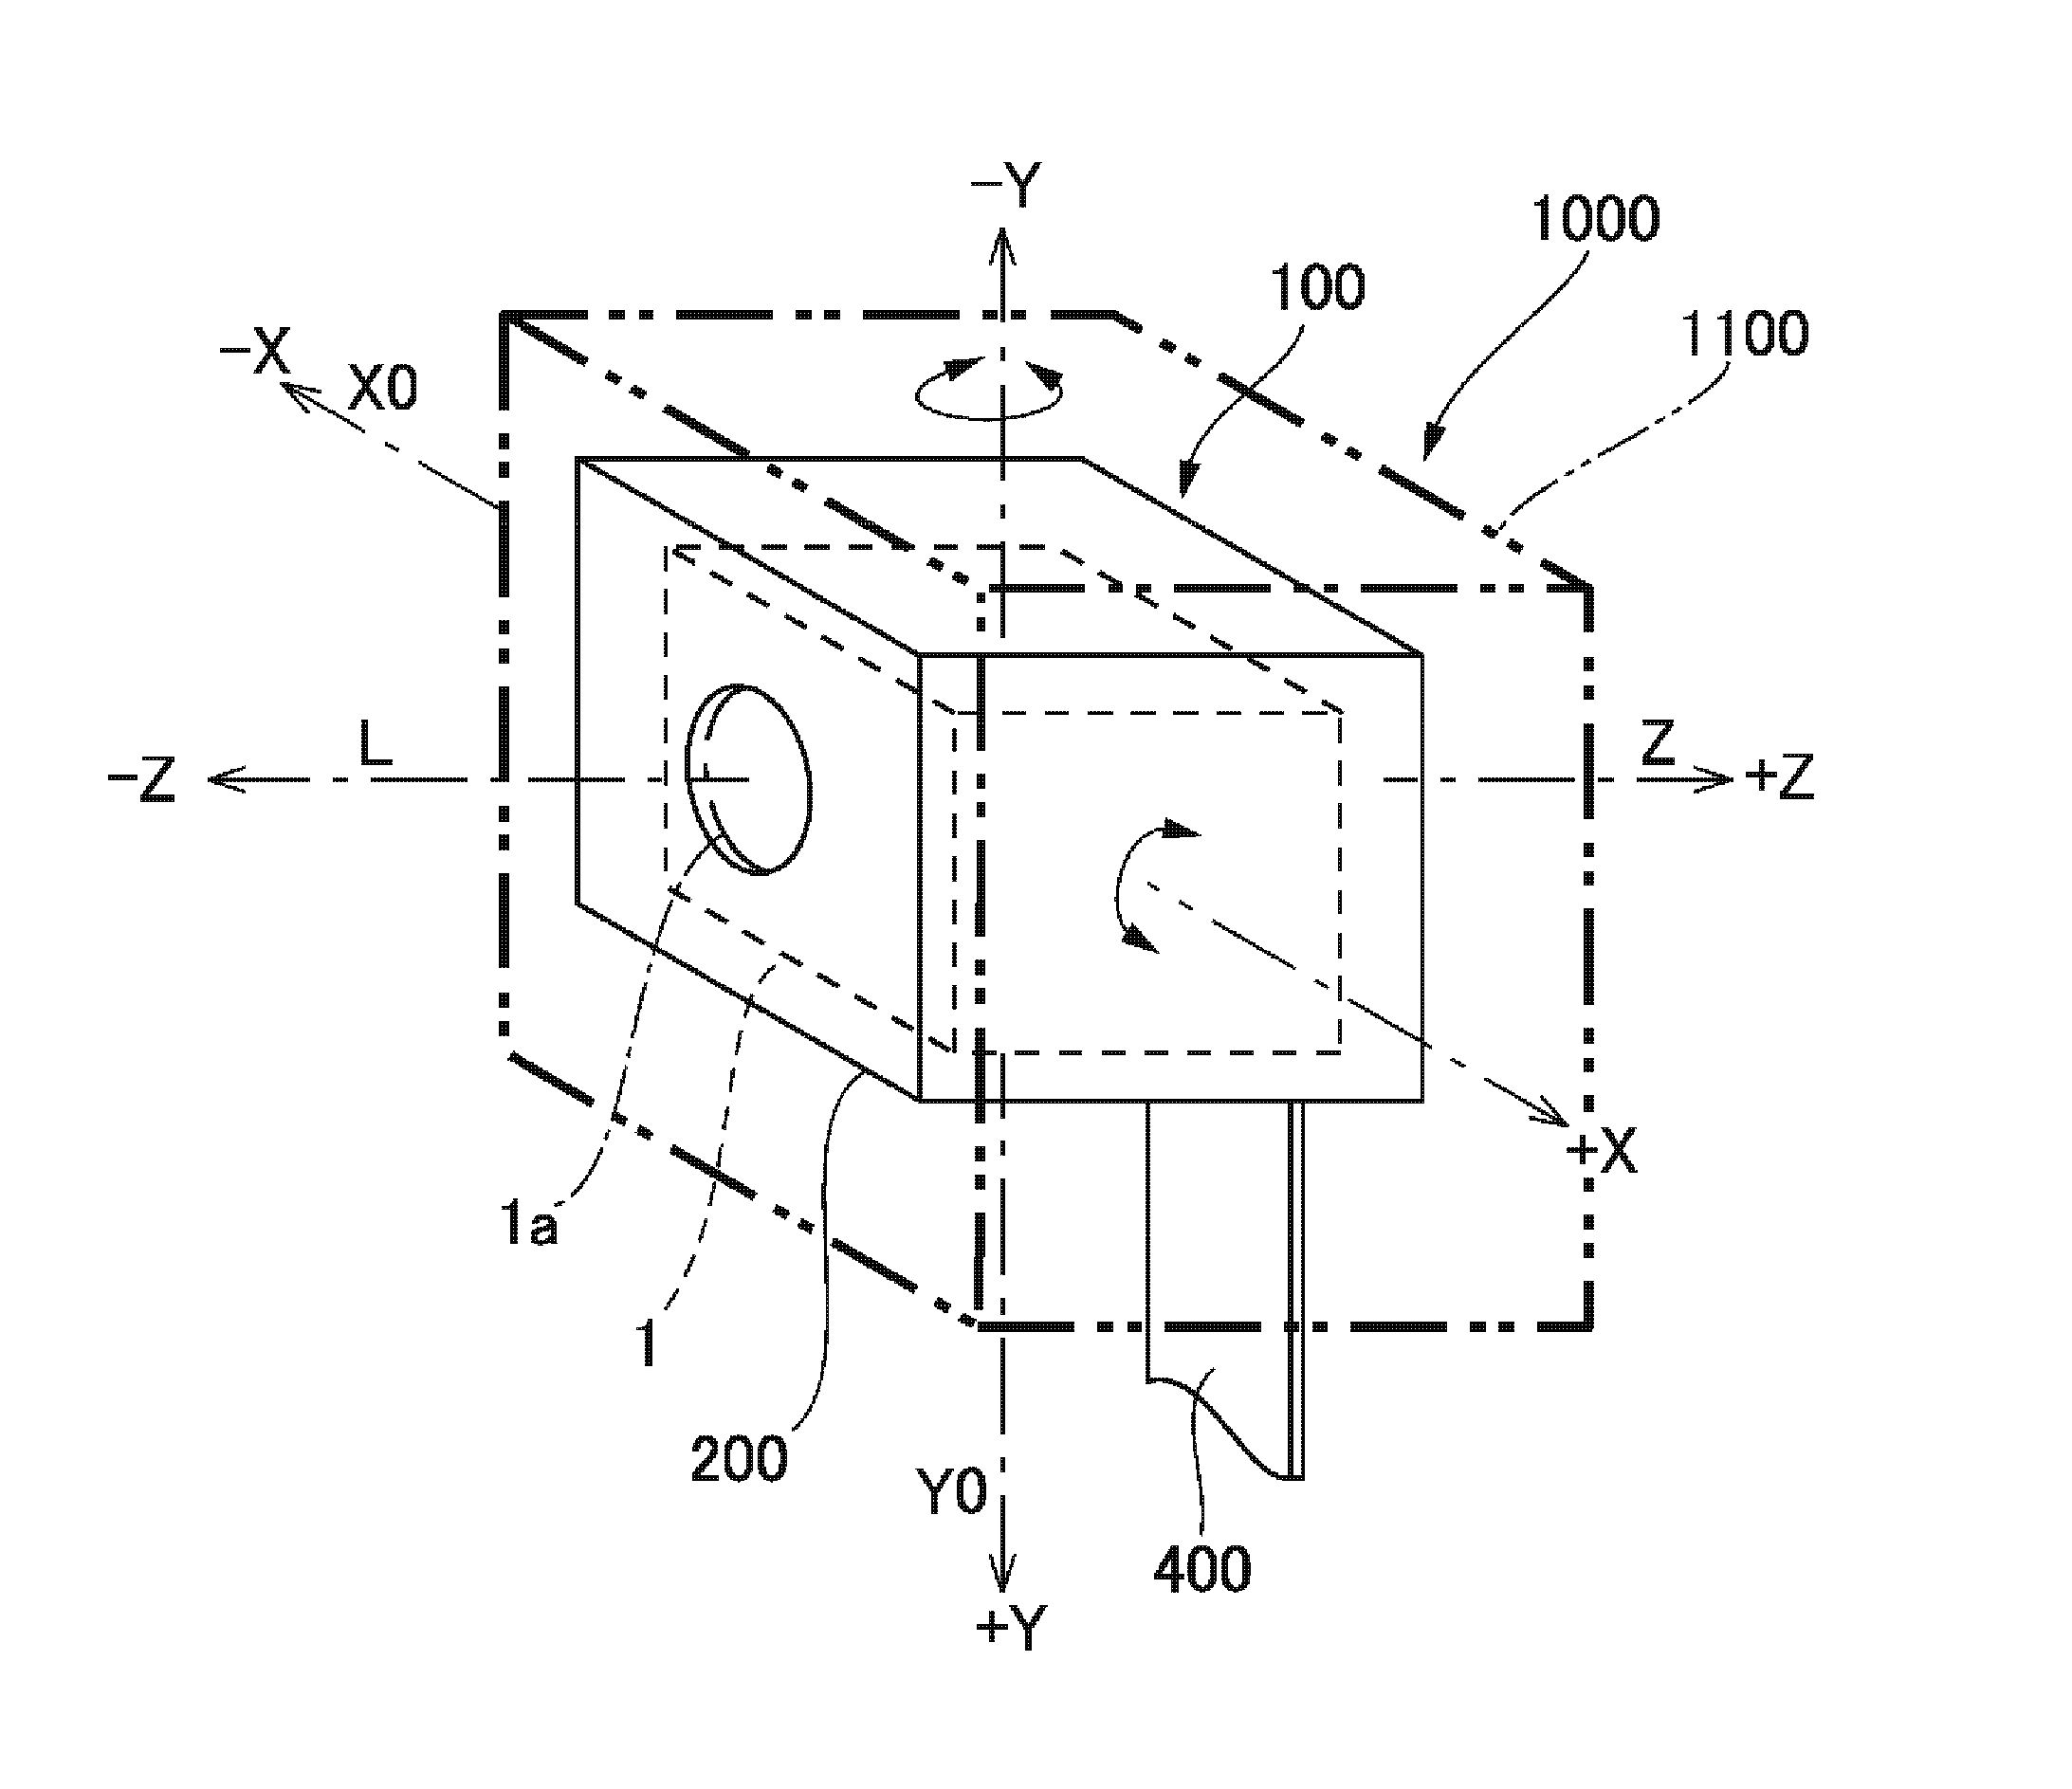 Optical unit with shake compensation function